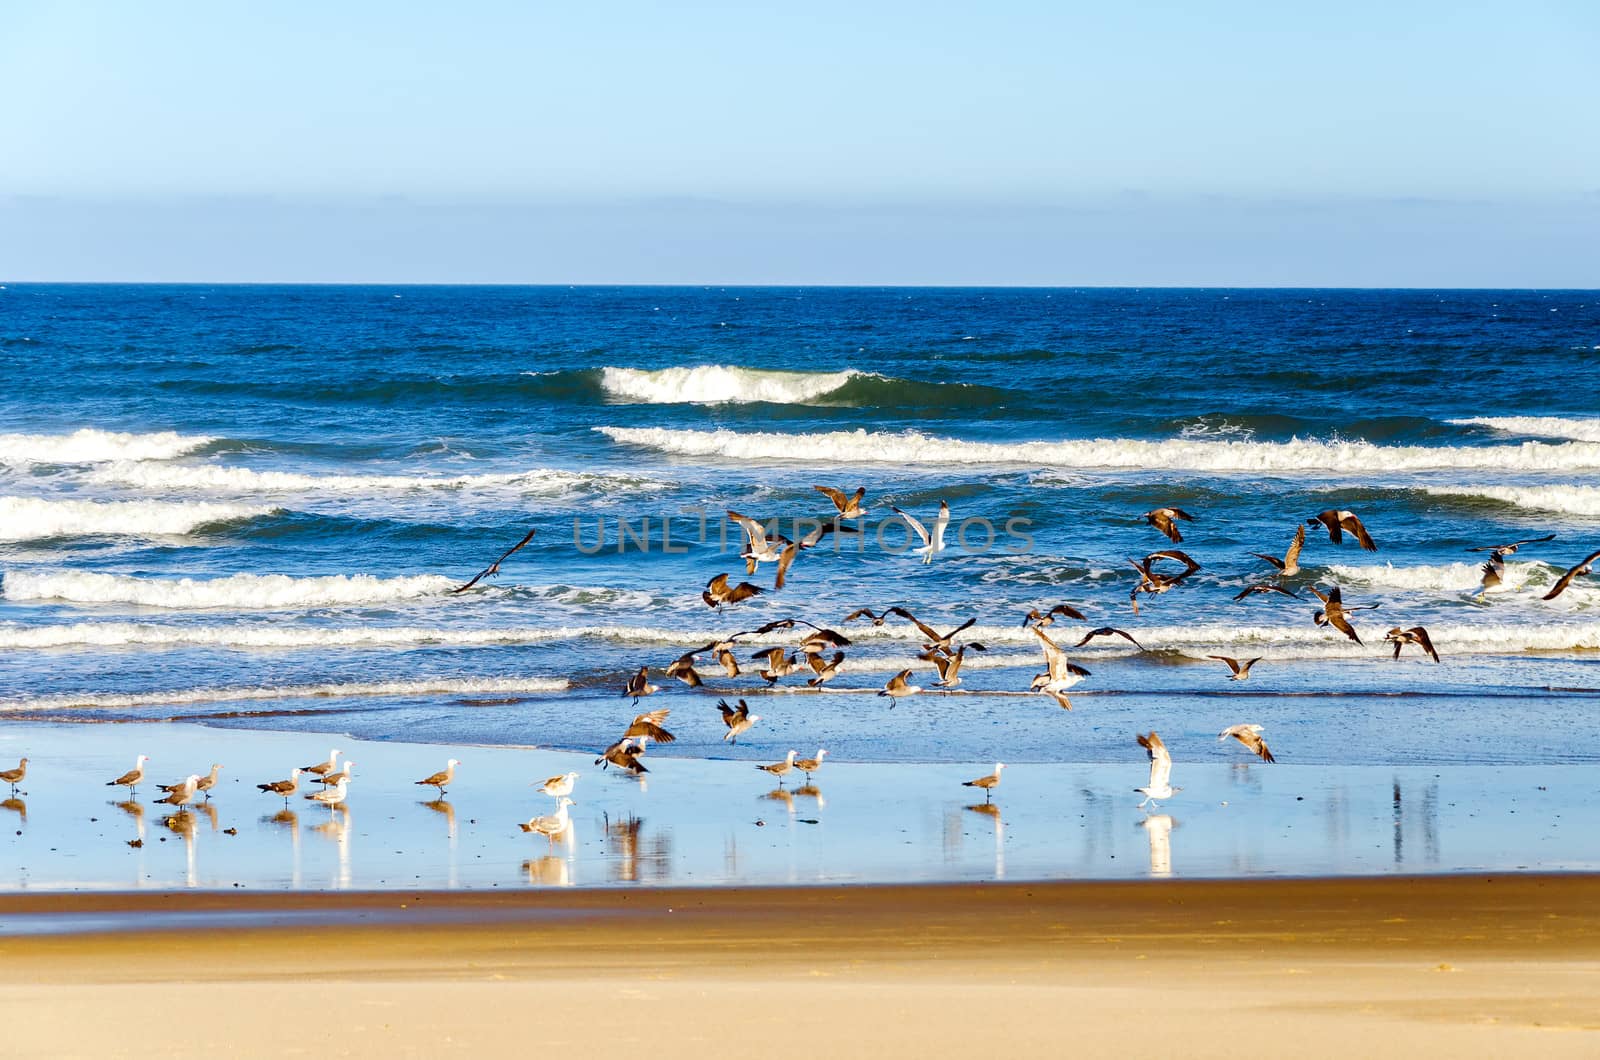 Beach and Pacific Ocean at Lincoln City, Oregon with seagulls